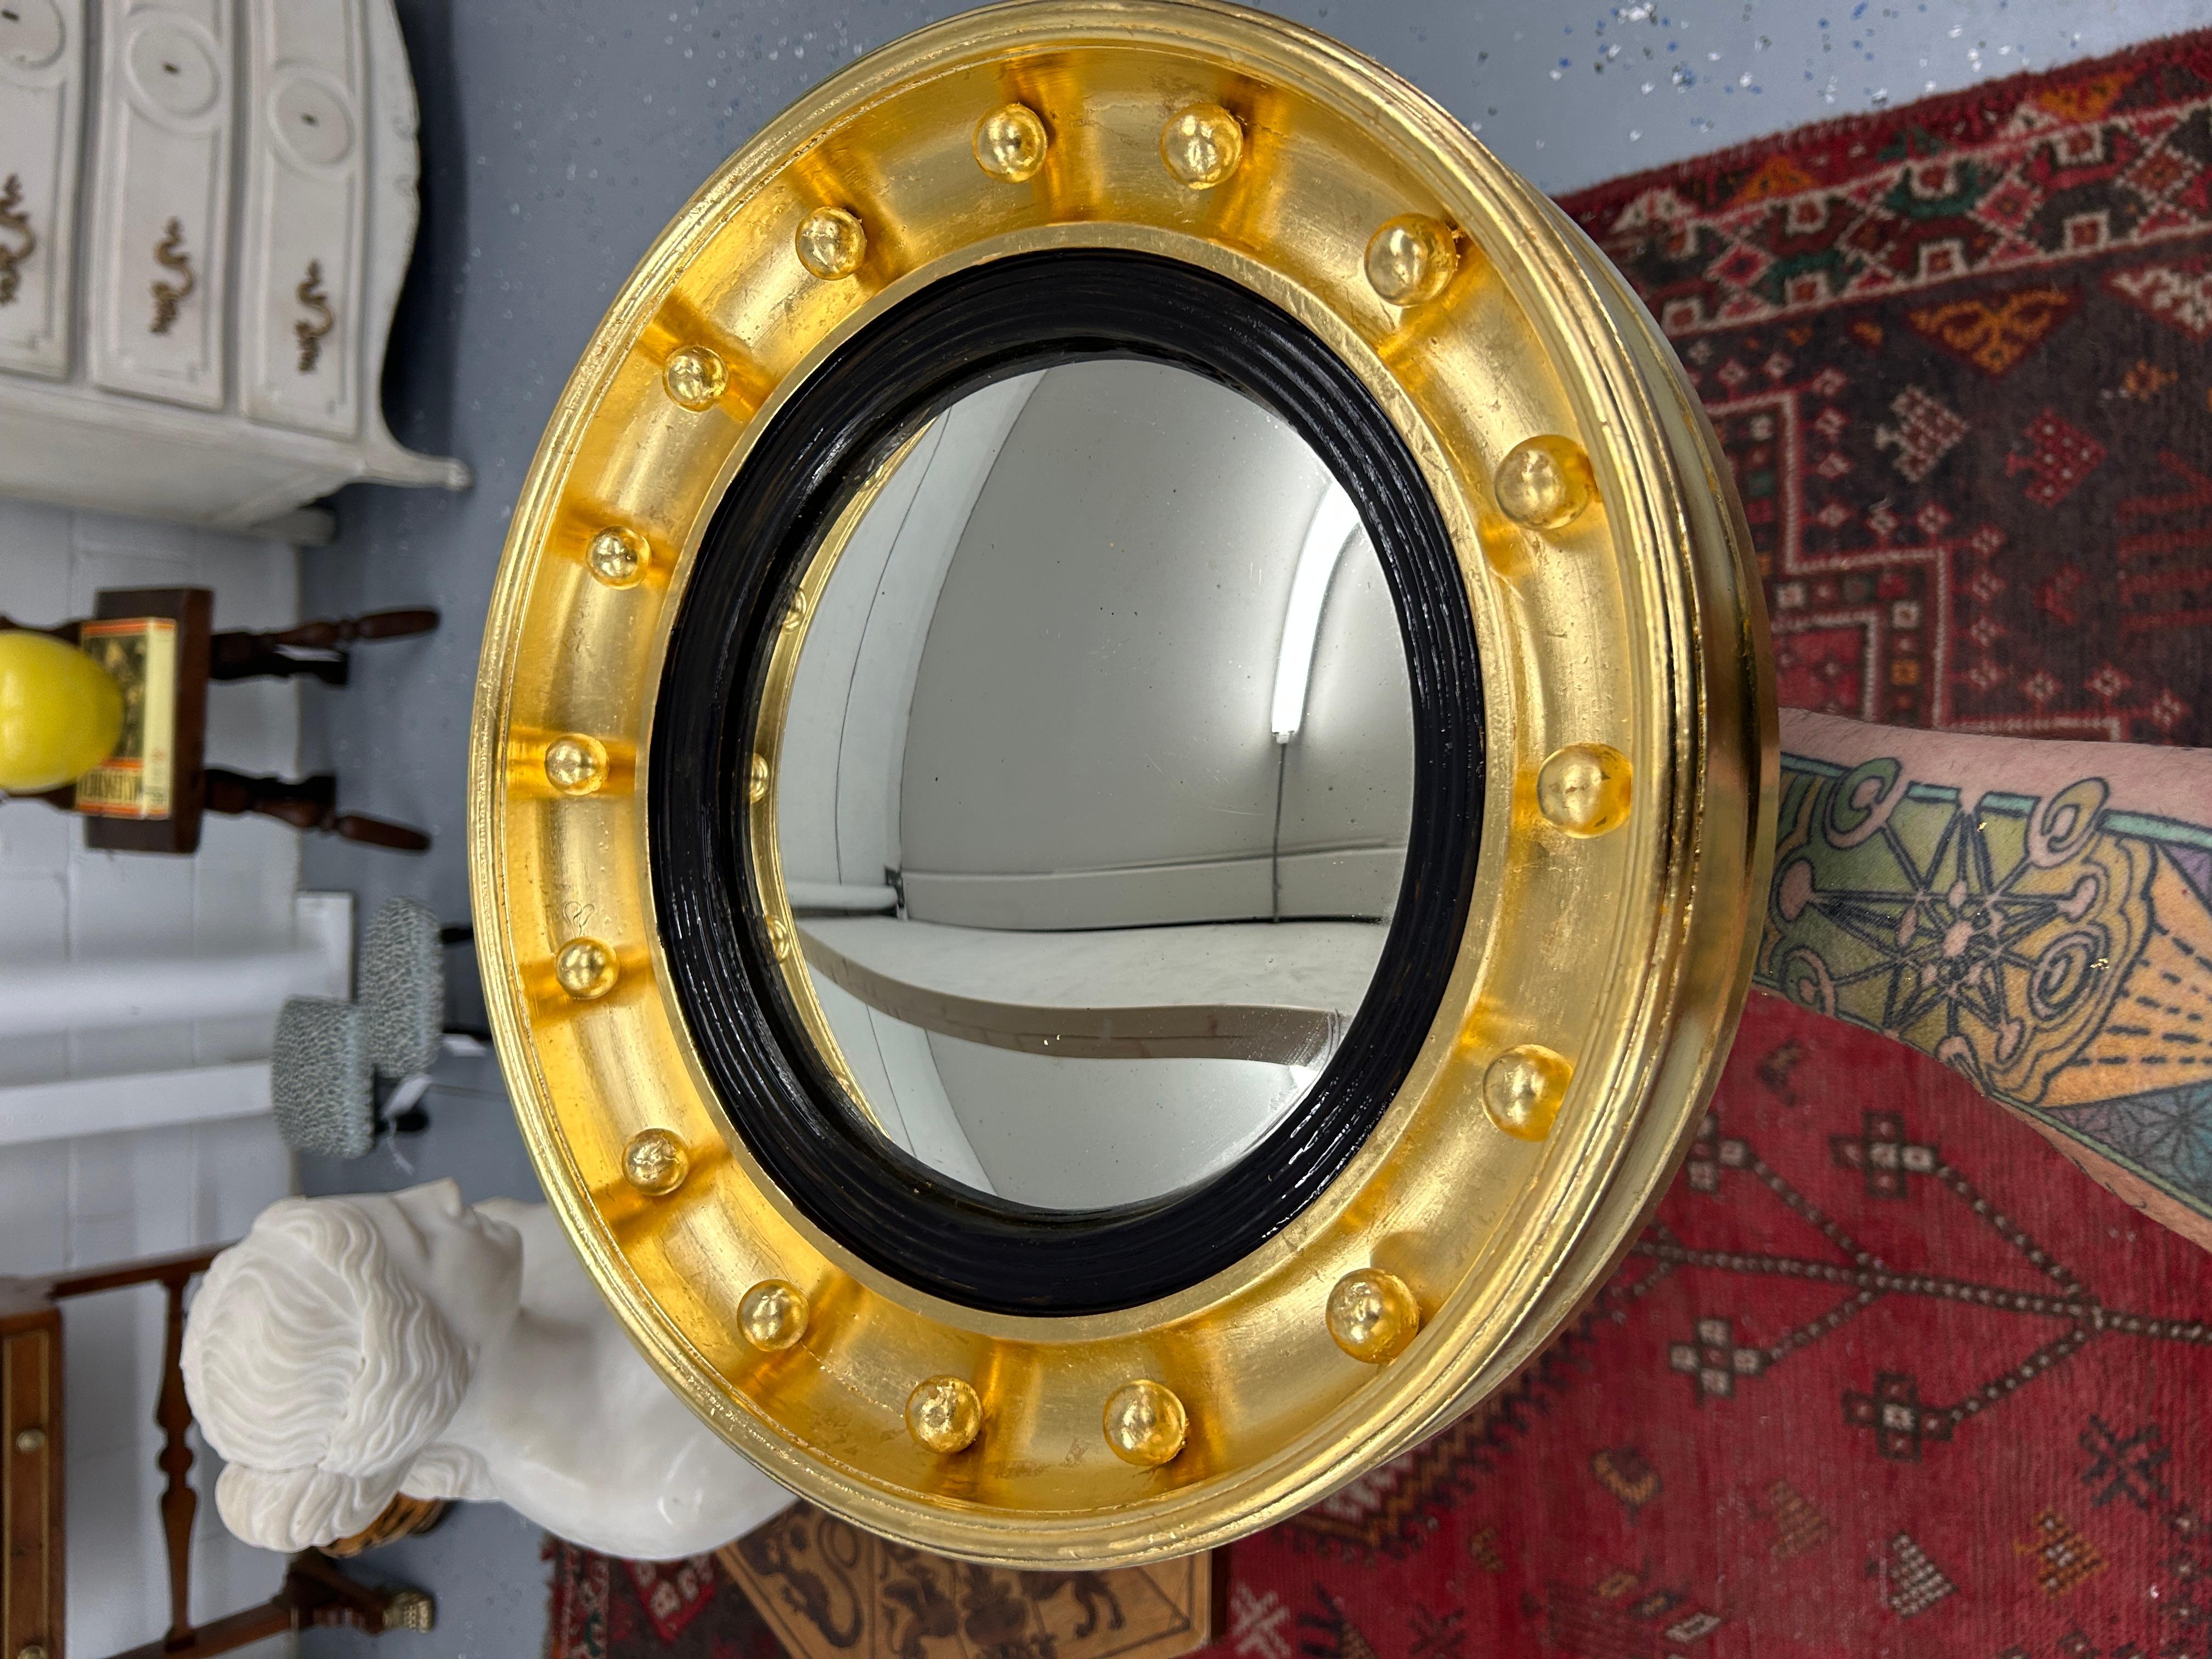 Behold the exquisite beauty of this remarkable 19th Century English Bullseye Convex Mirror, meticulously restored to its former glory and adorned with resplendent gilding of 23k gold leaf. This rare gem of a mirror is a testament to the elegance and